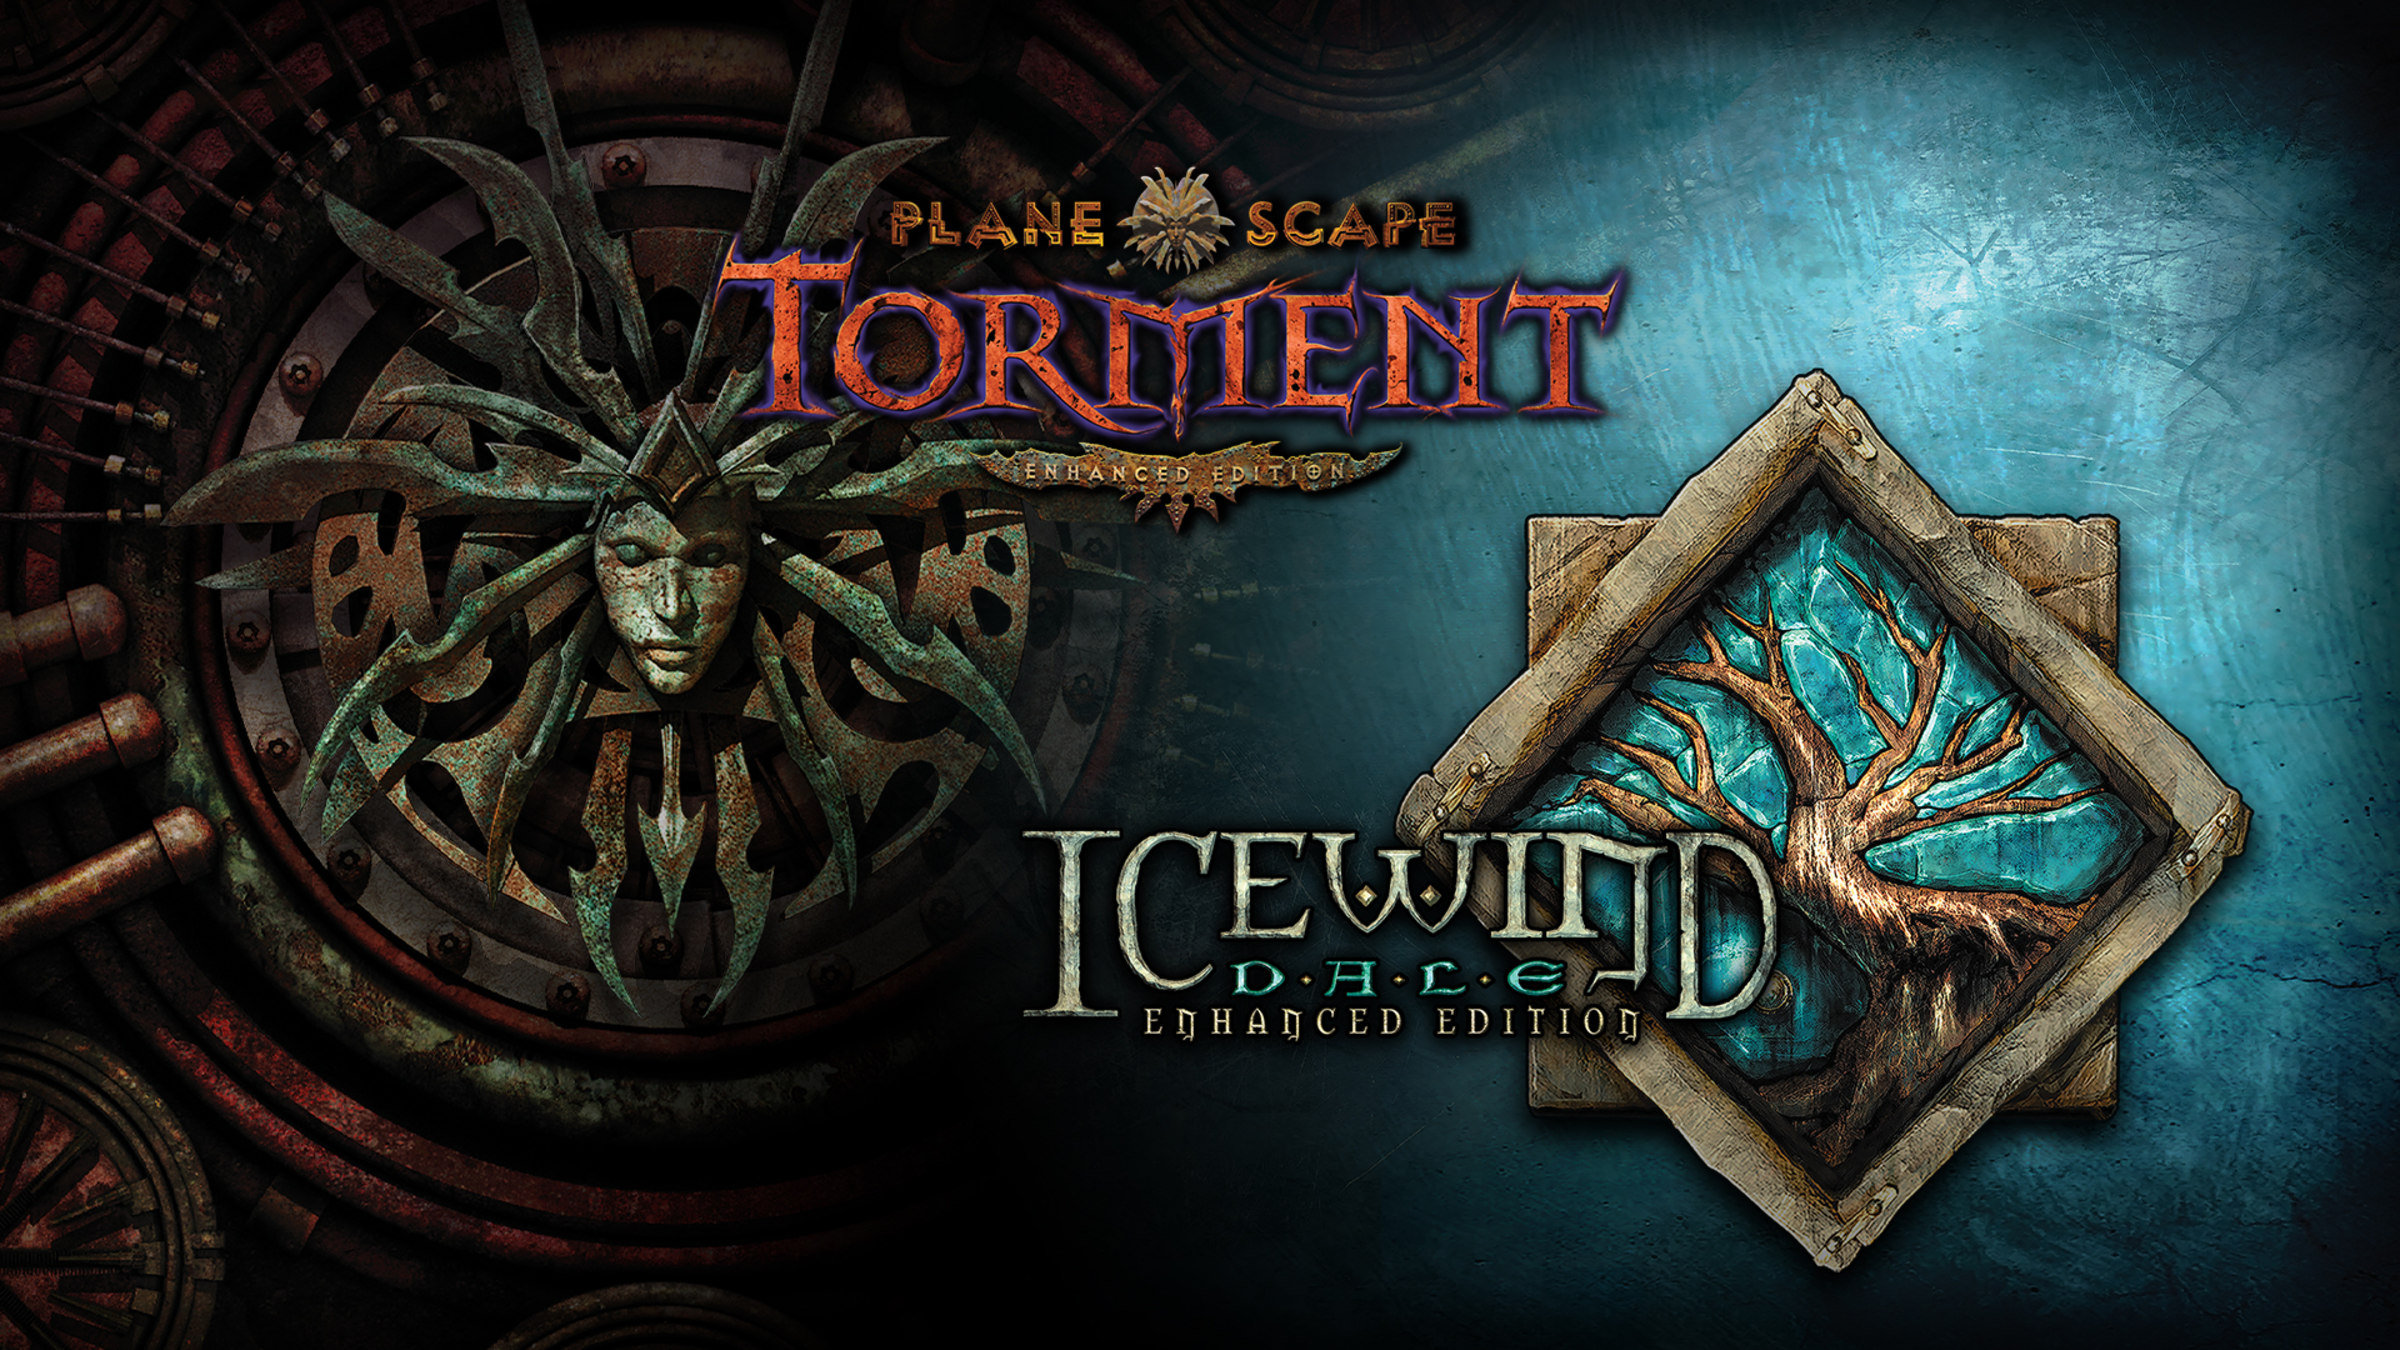 Planescape: Torment and Icewind Dale: for Nintendo Enhanced Site Nintendo Switch Editions - Official